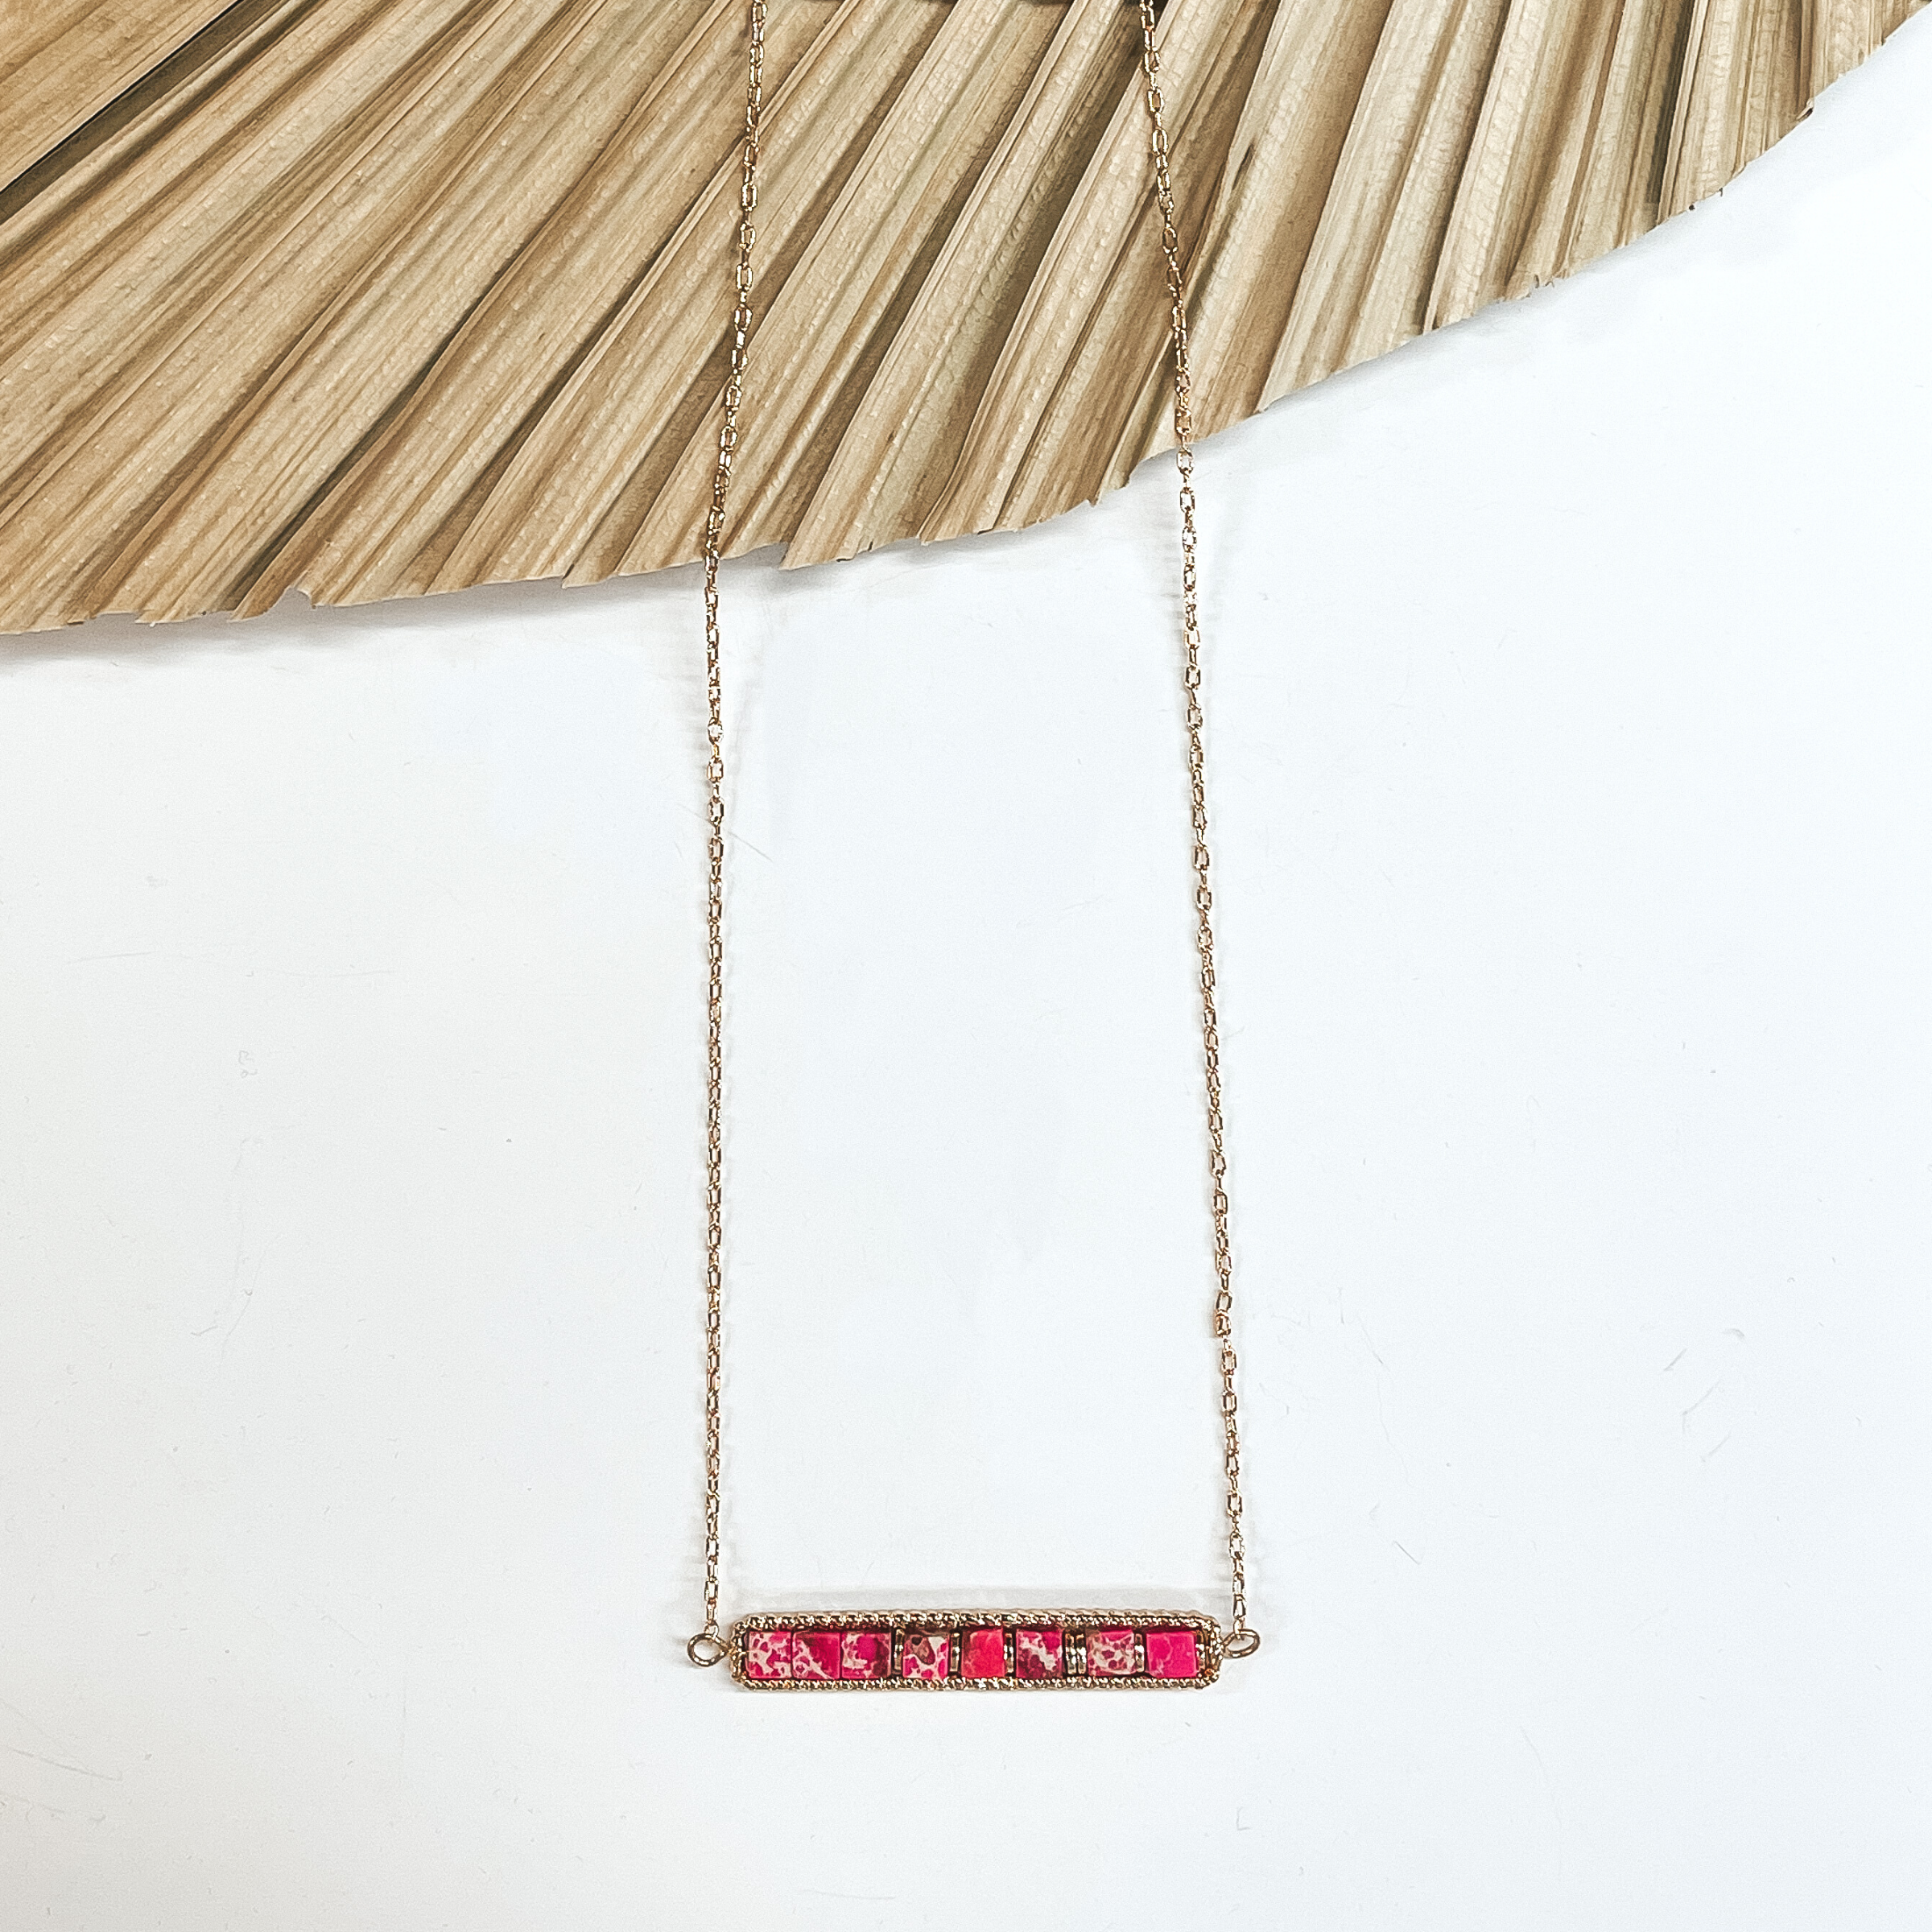 This is a gold necklace with a horizontal bar  pendant with semi-precious stones in fuchsia  in a gold setting. This necklace is taken laying on a dried up palm  leaf and white background.